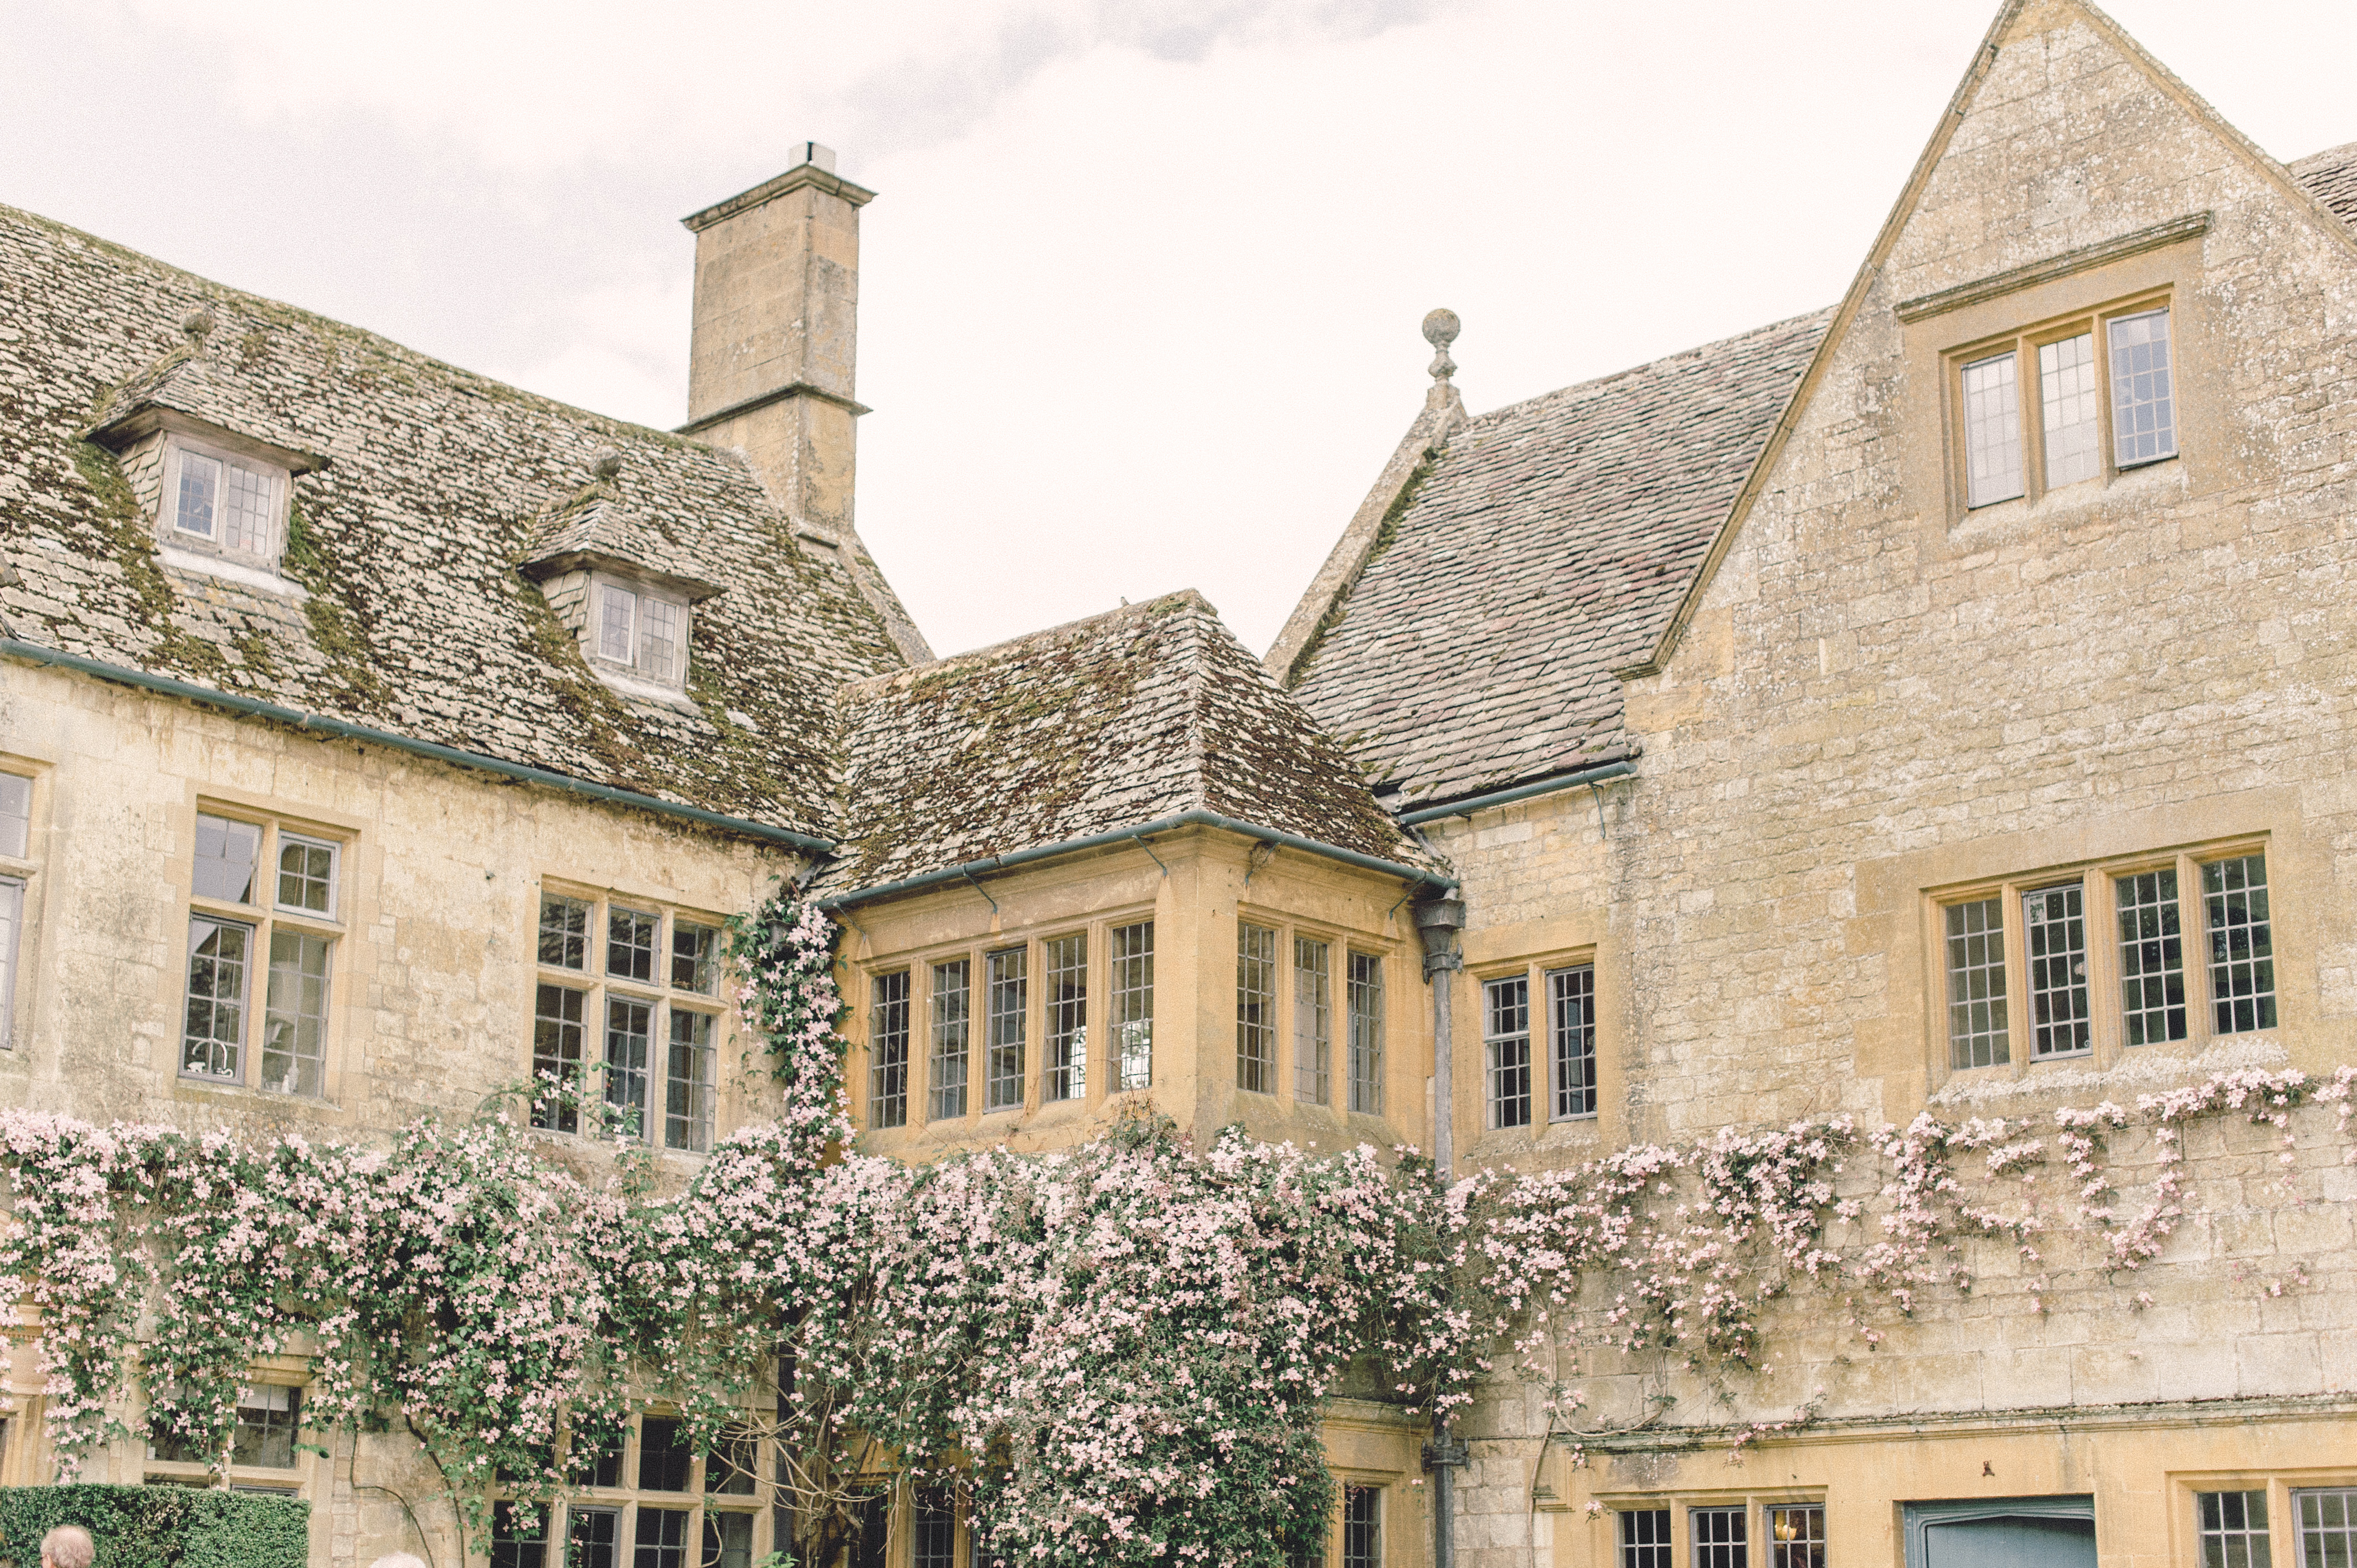 Estate House at Hidcote Manor Garden in the Cotswolds